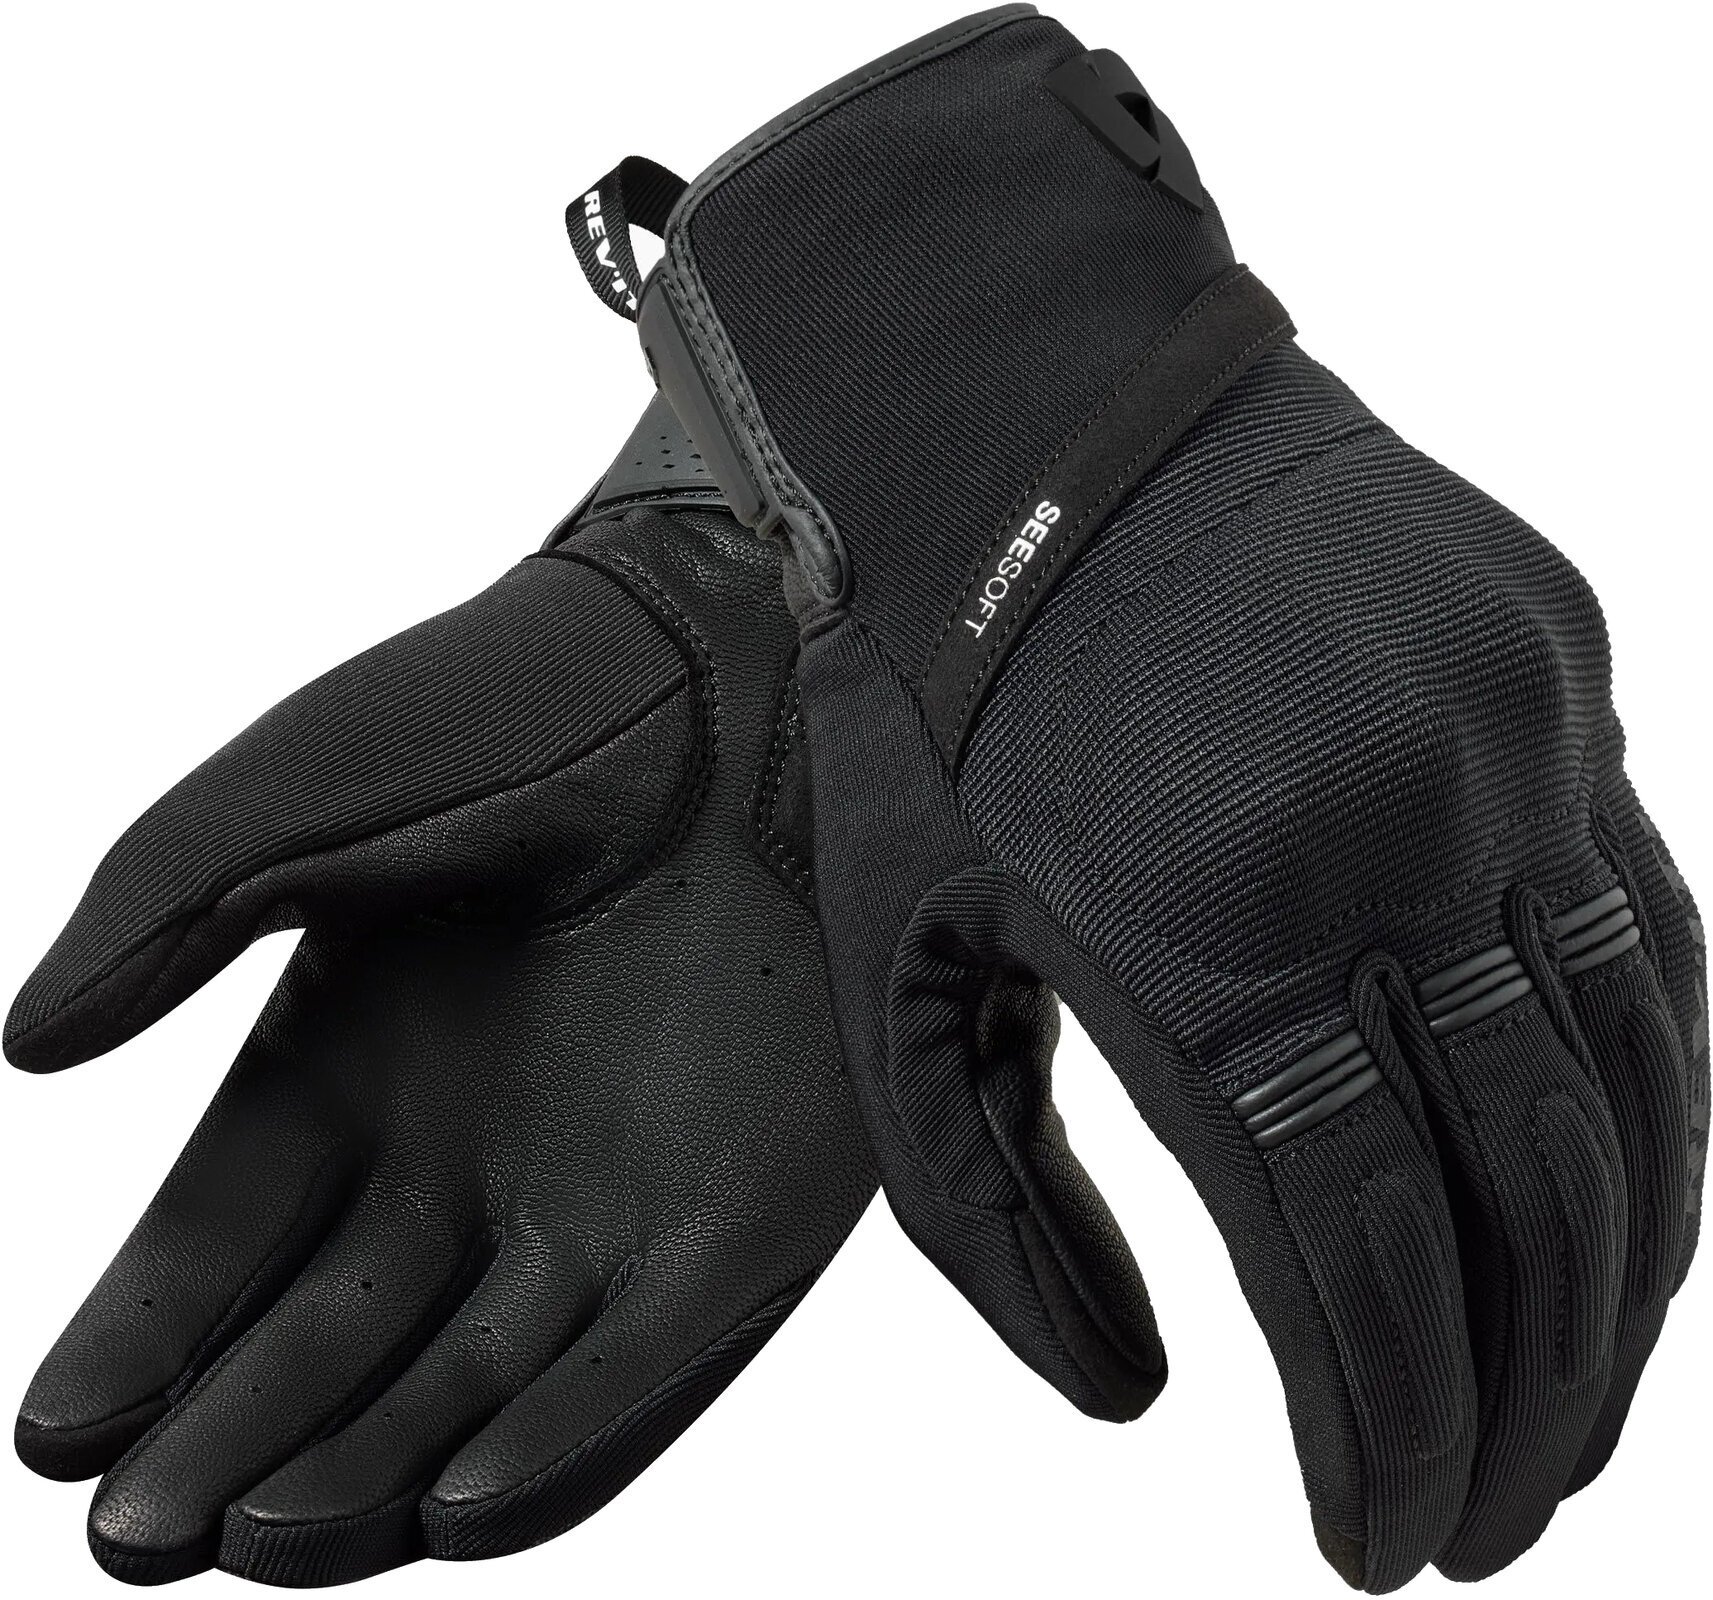 Motorcycle Gloves Rev'it! Gloves Mosca 2 Black 3XL Motorcycle Gloves